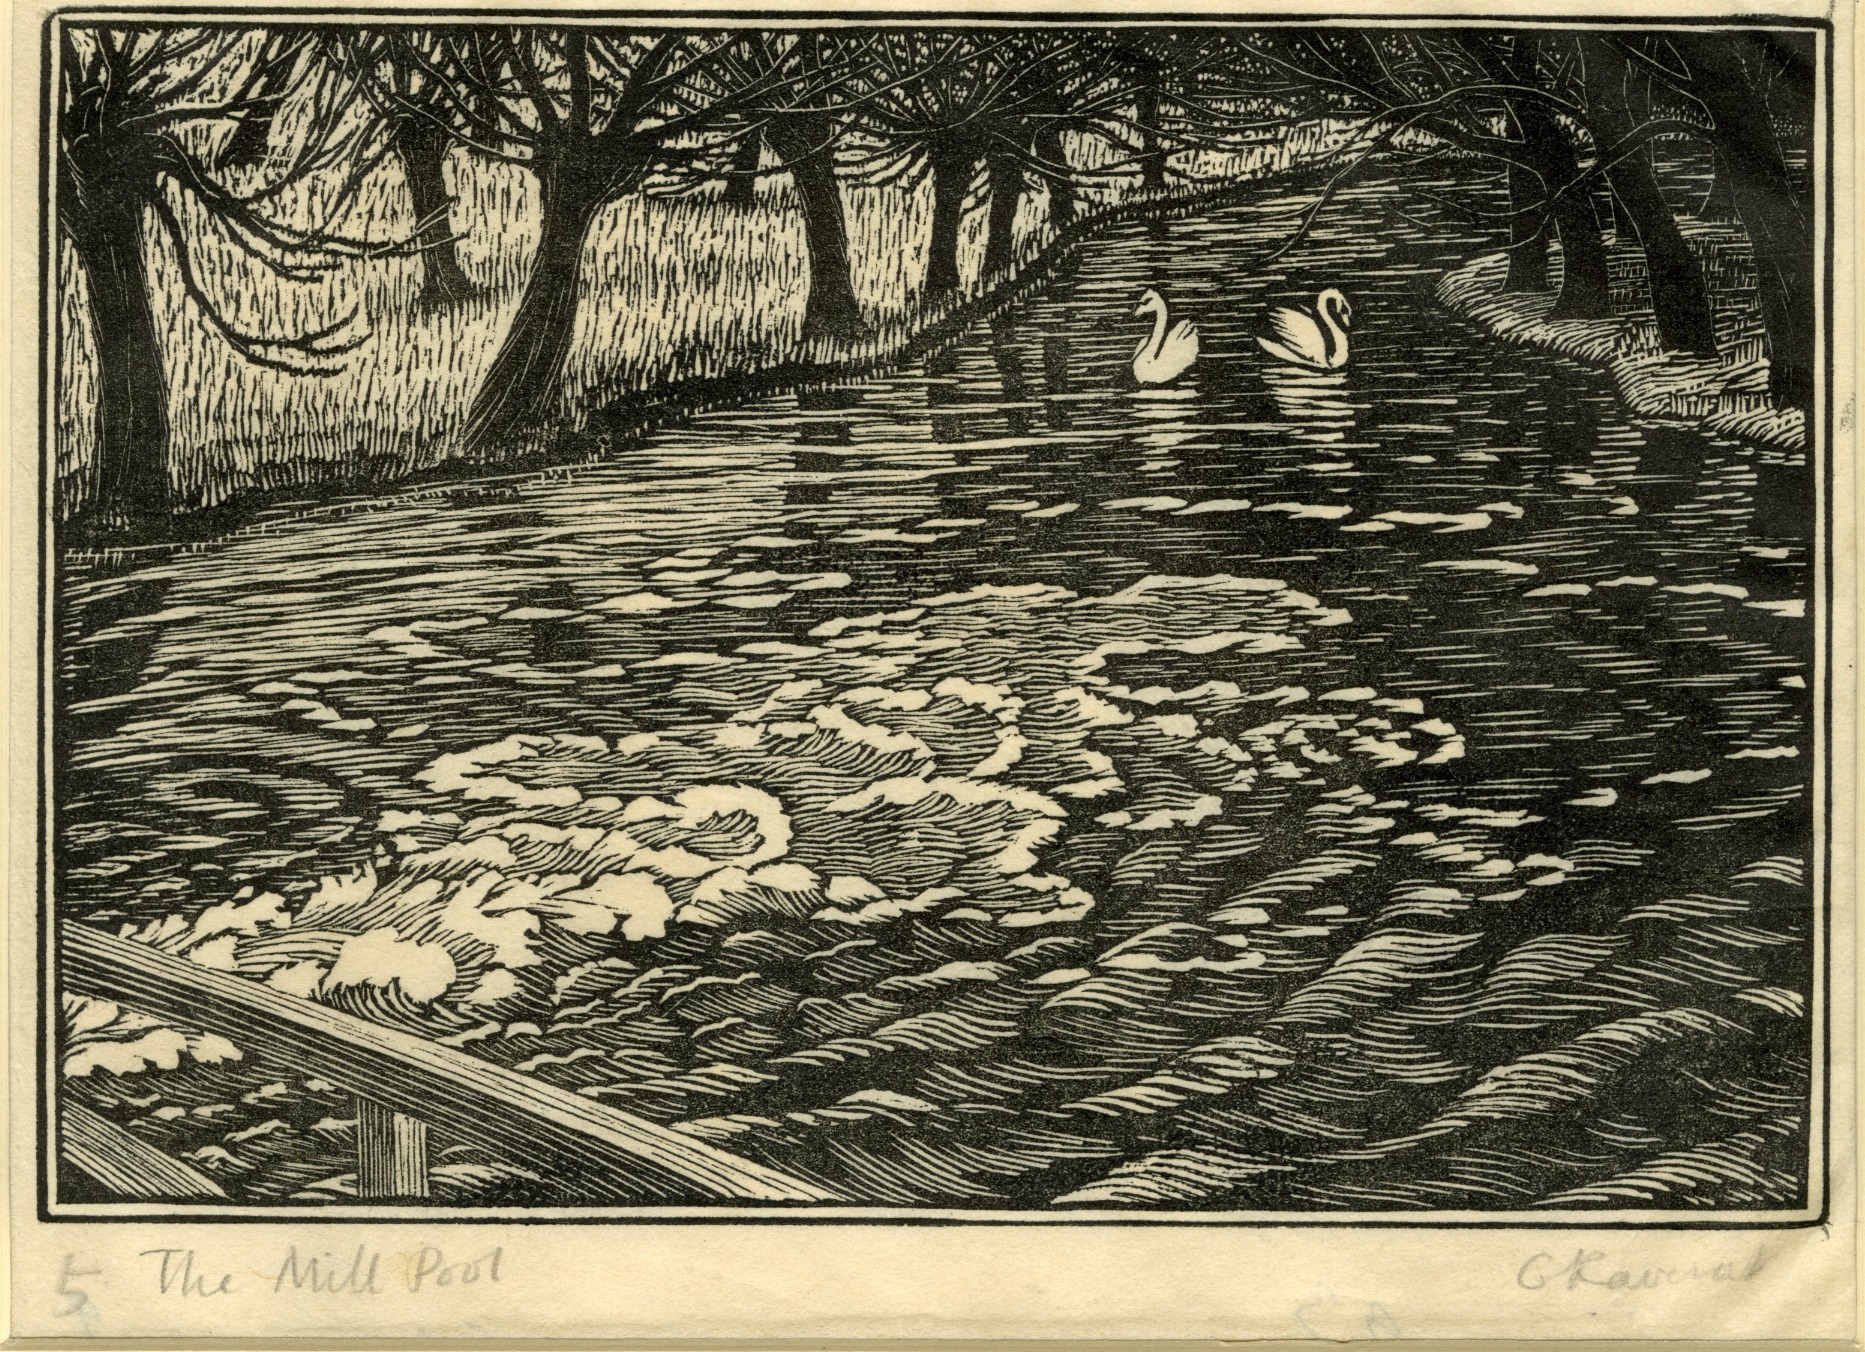 The mill pool (1931)